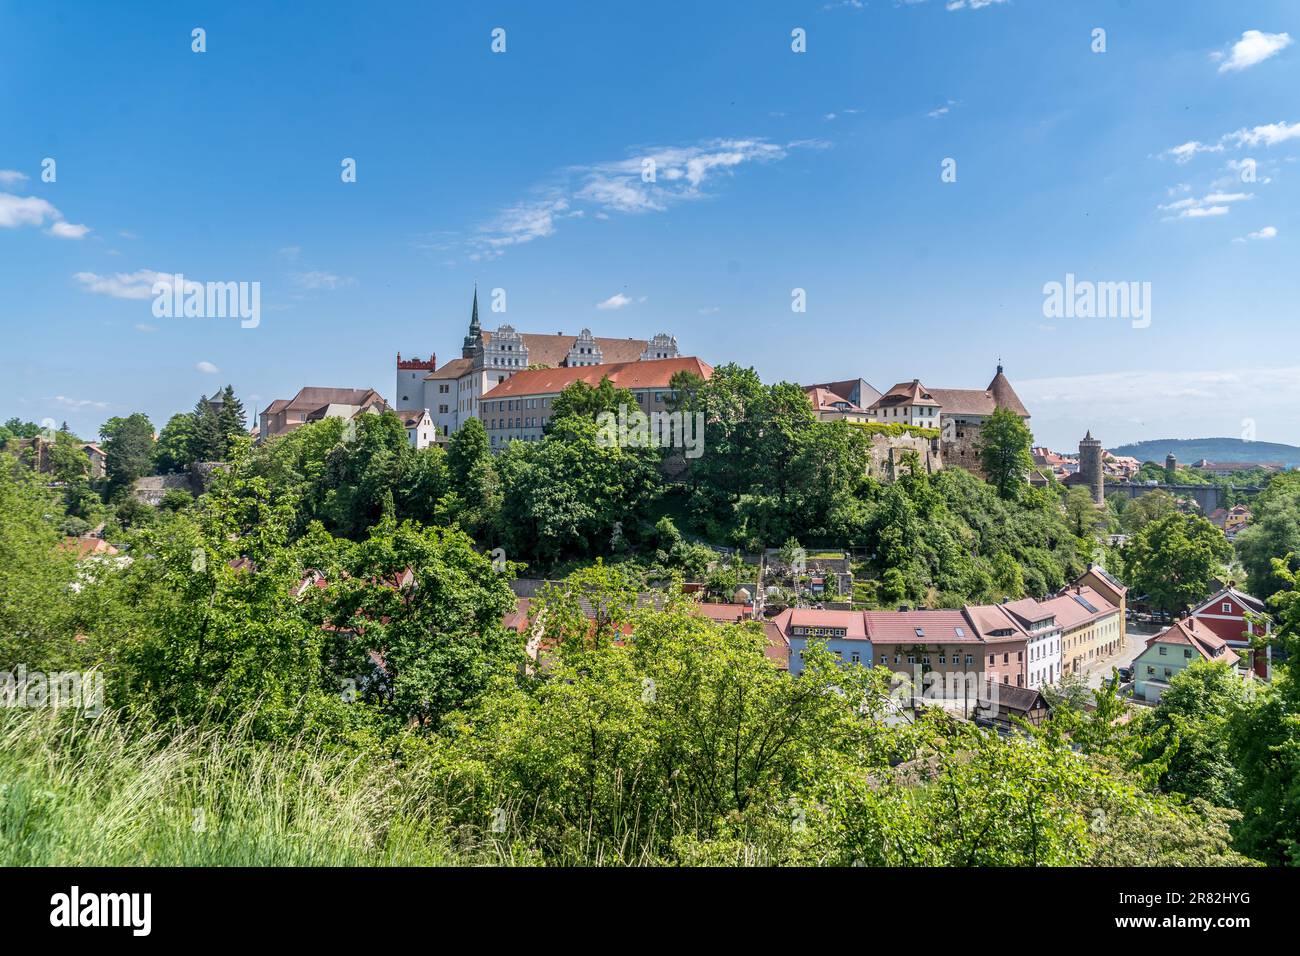 Aerial view of defensive towers and medieval fortification in historic Bautzen Saxony Germany Stock Photo